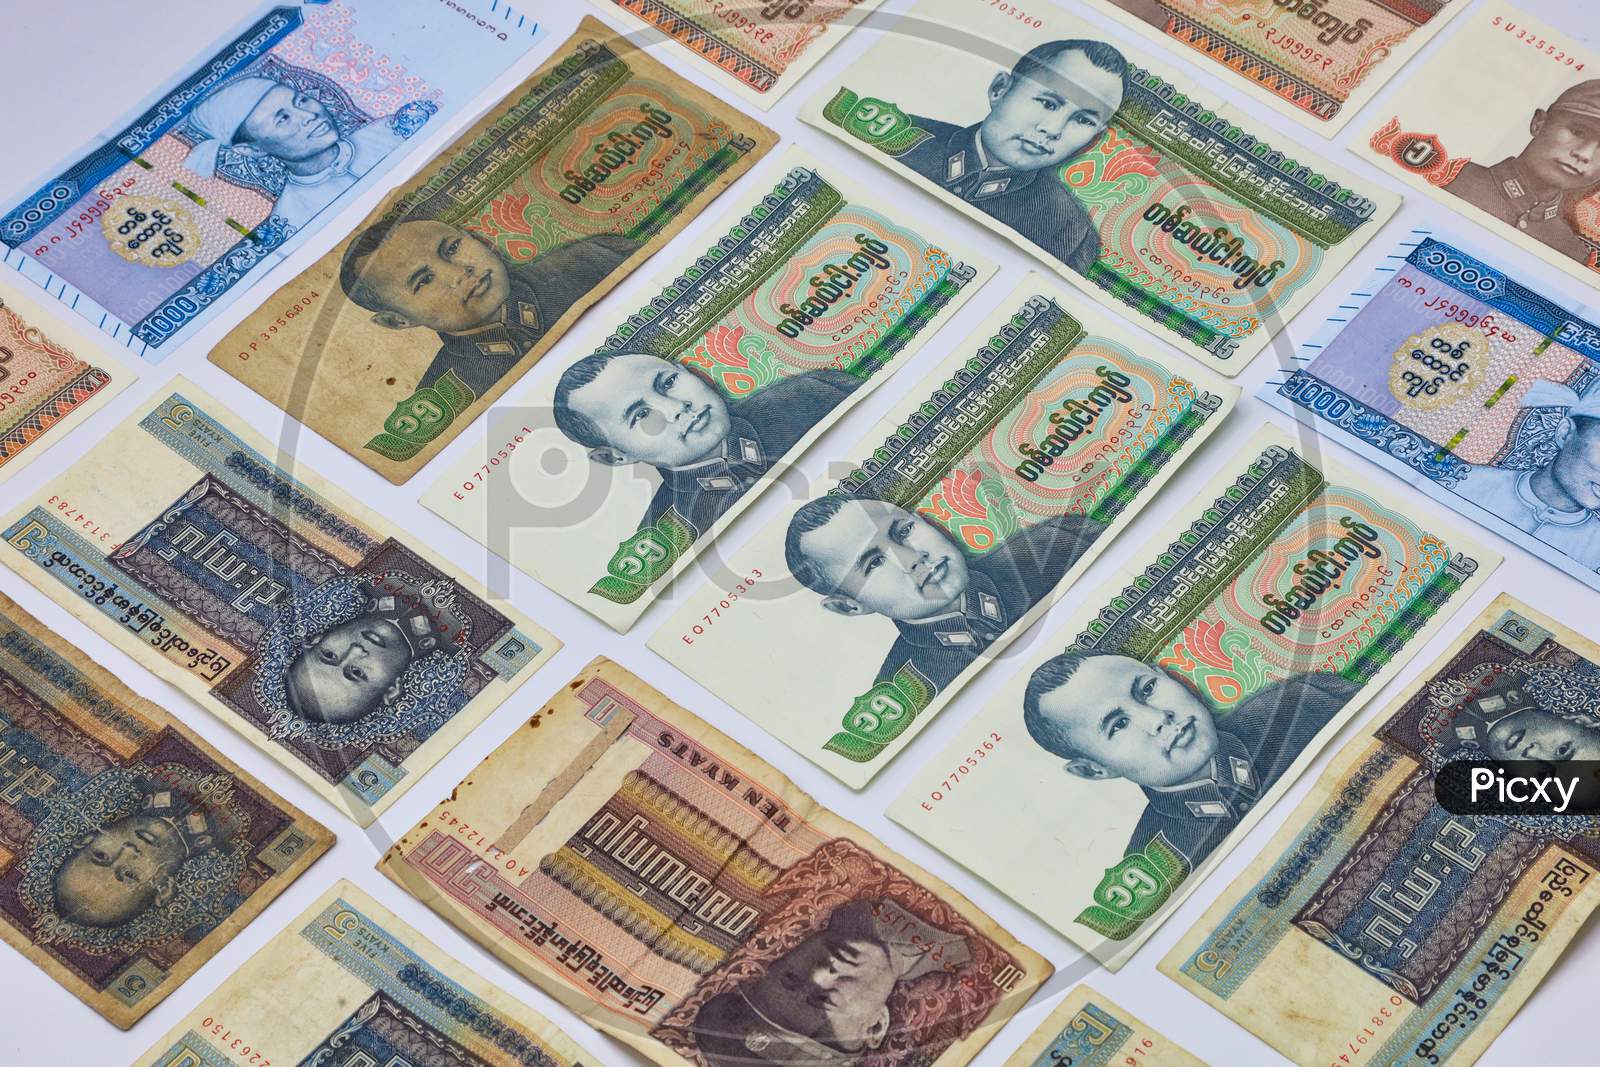 Myanmar Kyats Banknote, Myanmar Kyat Currency Notes placed in sequence on White Background